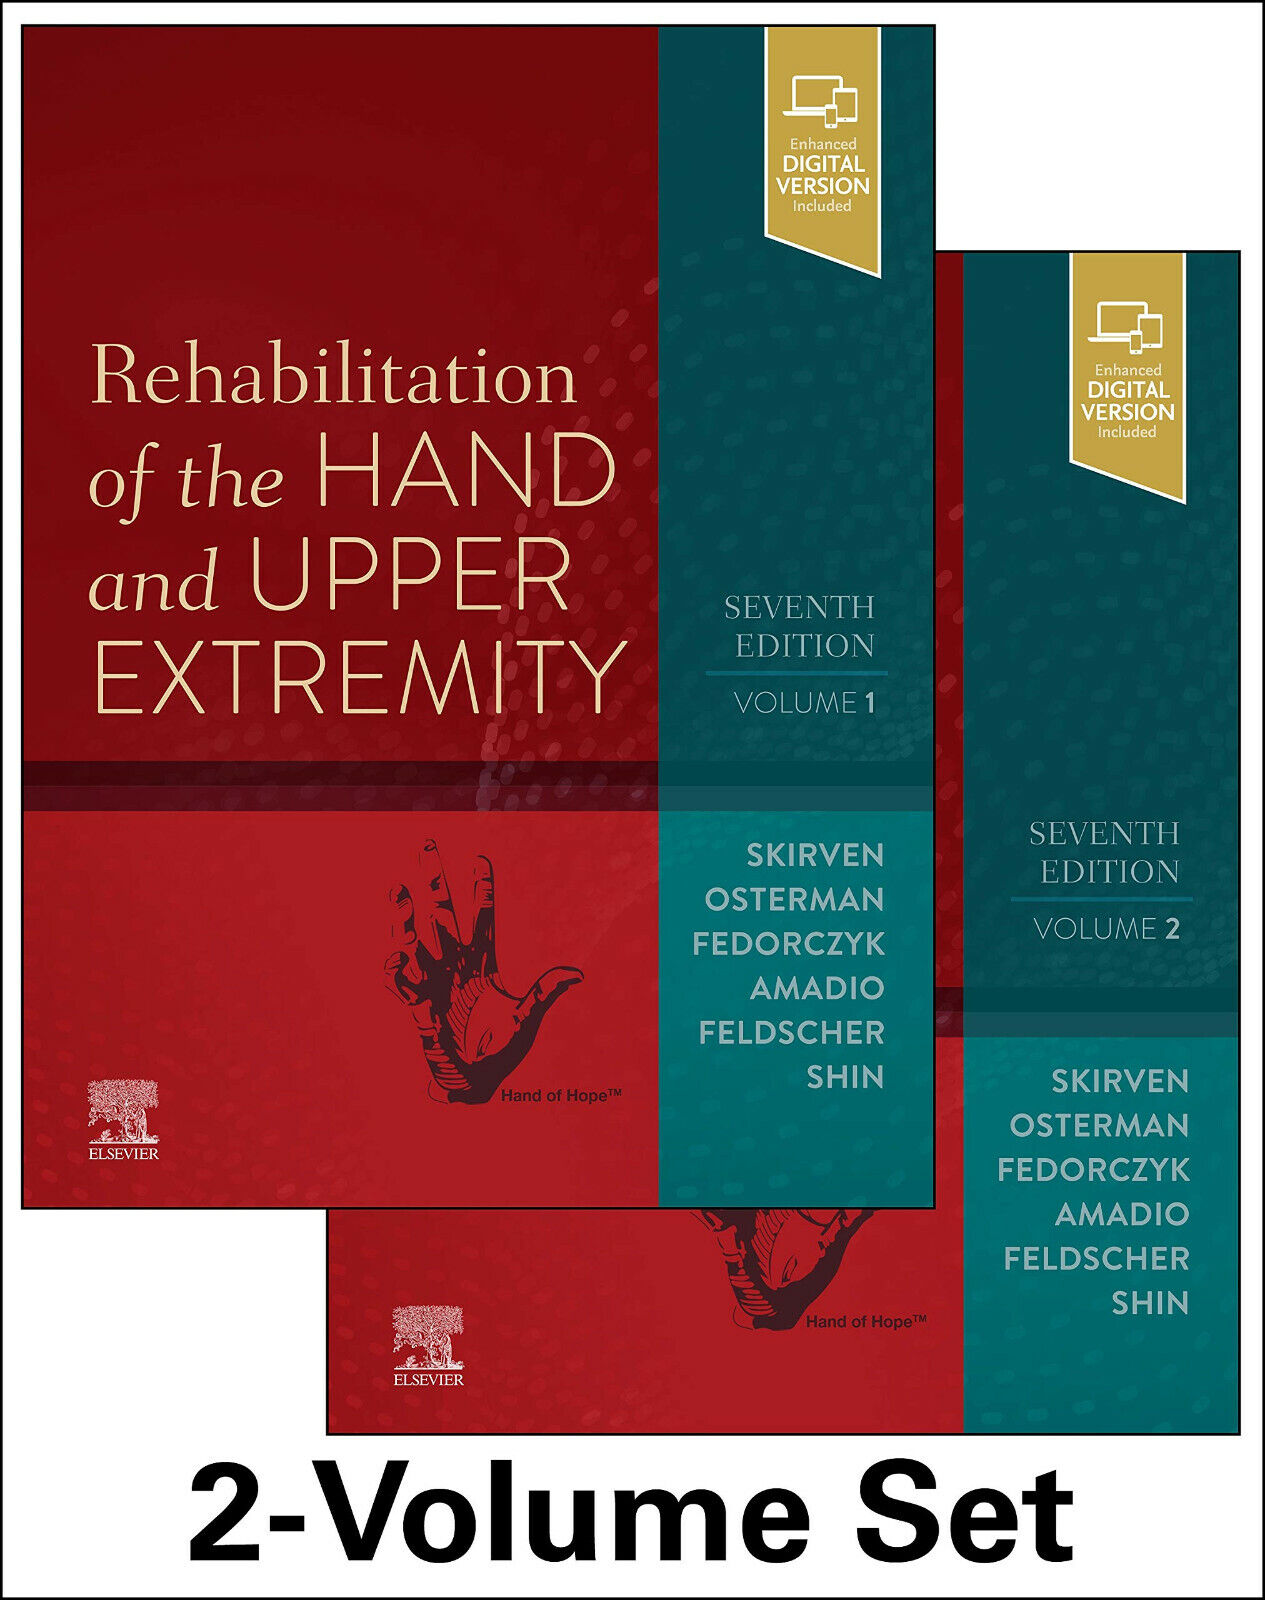 Rehabilitation of the Hand and Upper Extremity - Elsevier, 2020